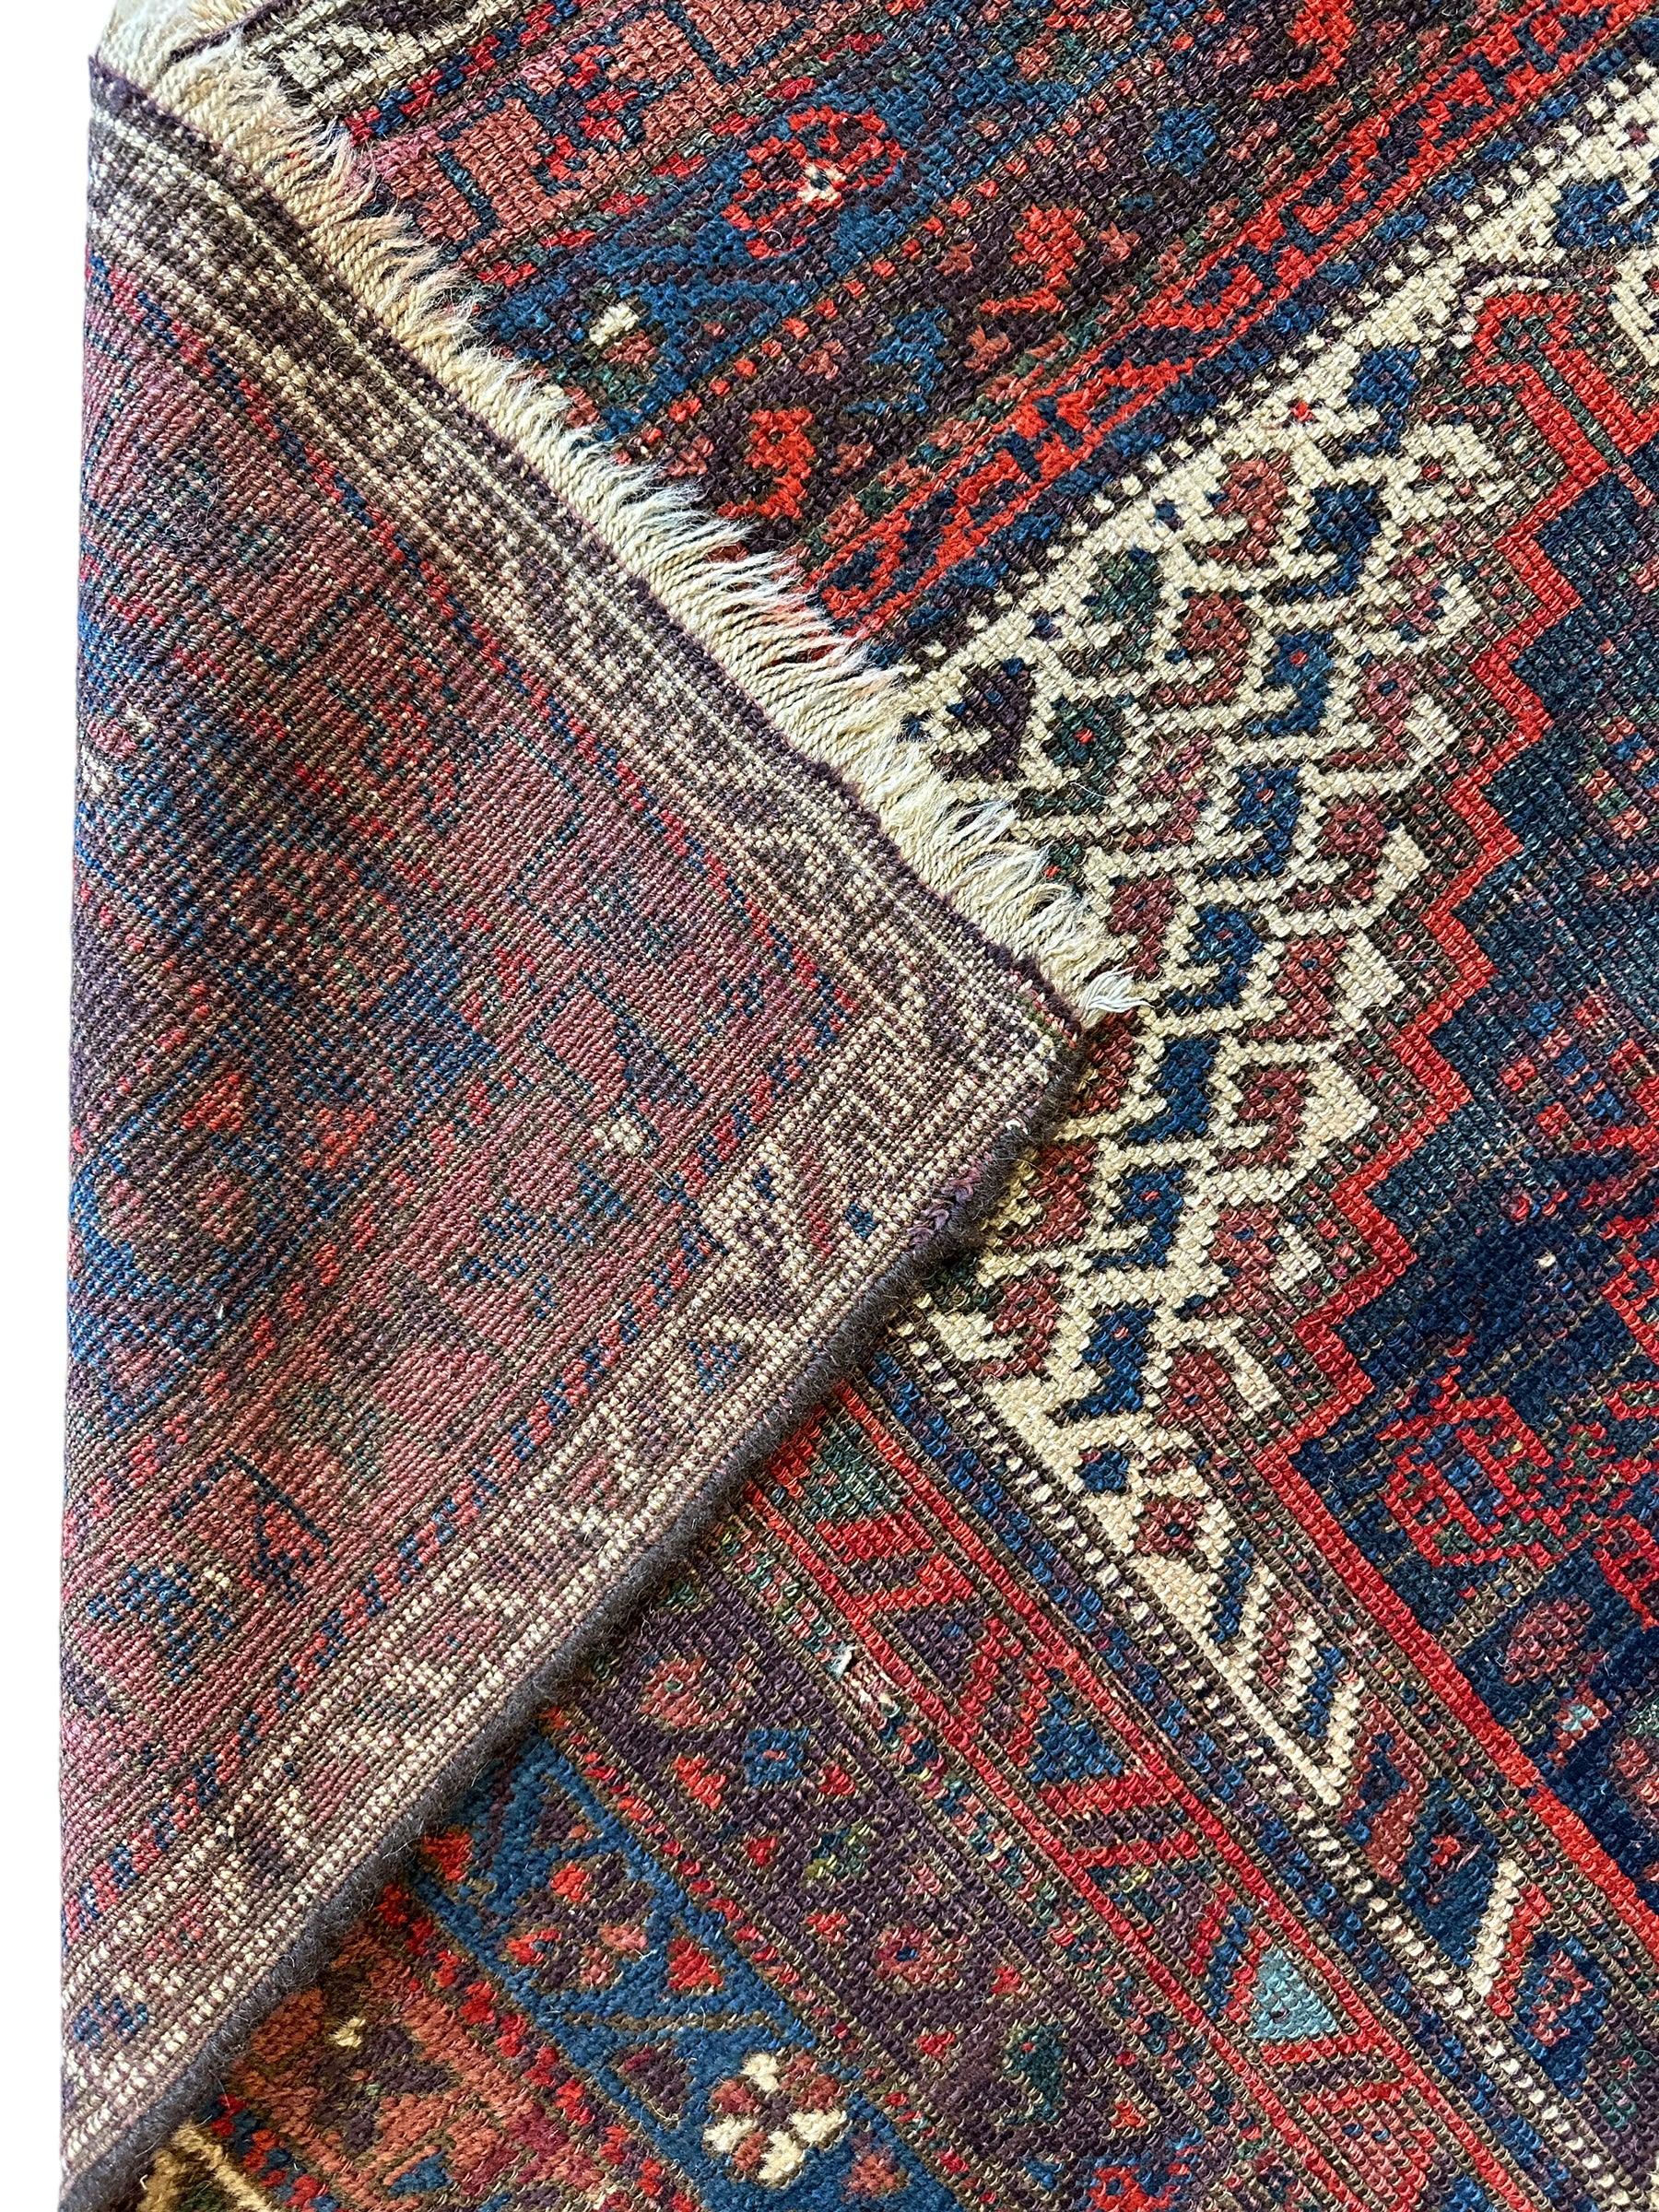 Antique Persian Paisely Rug 4’6” x 7’